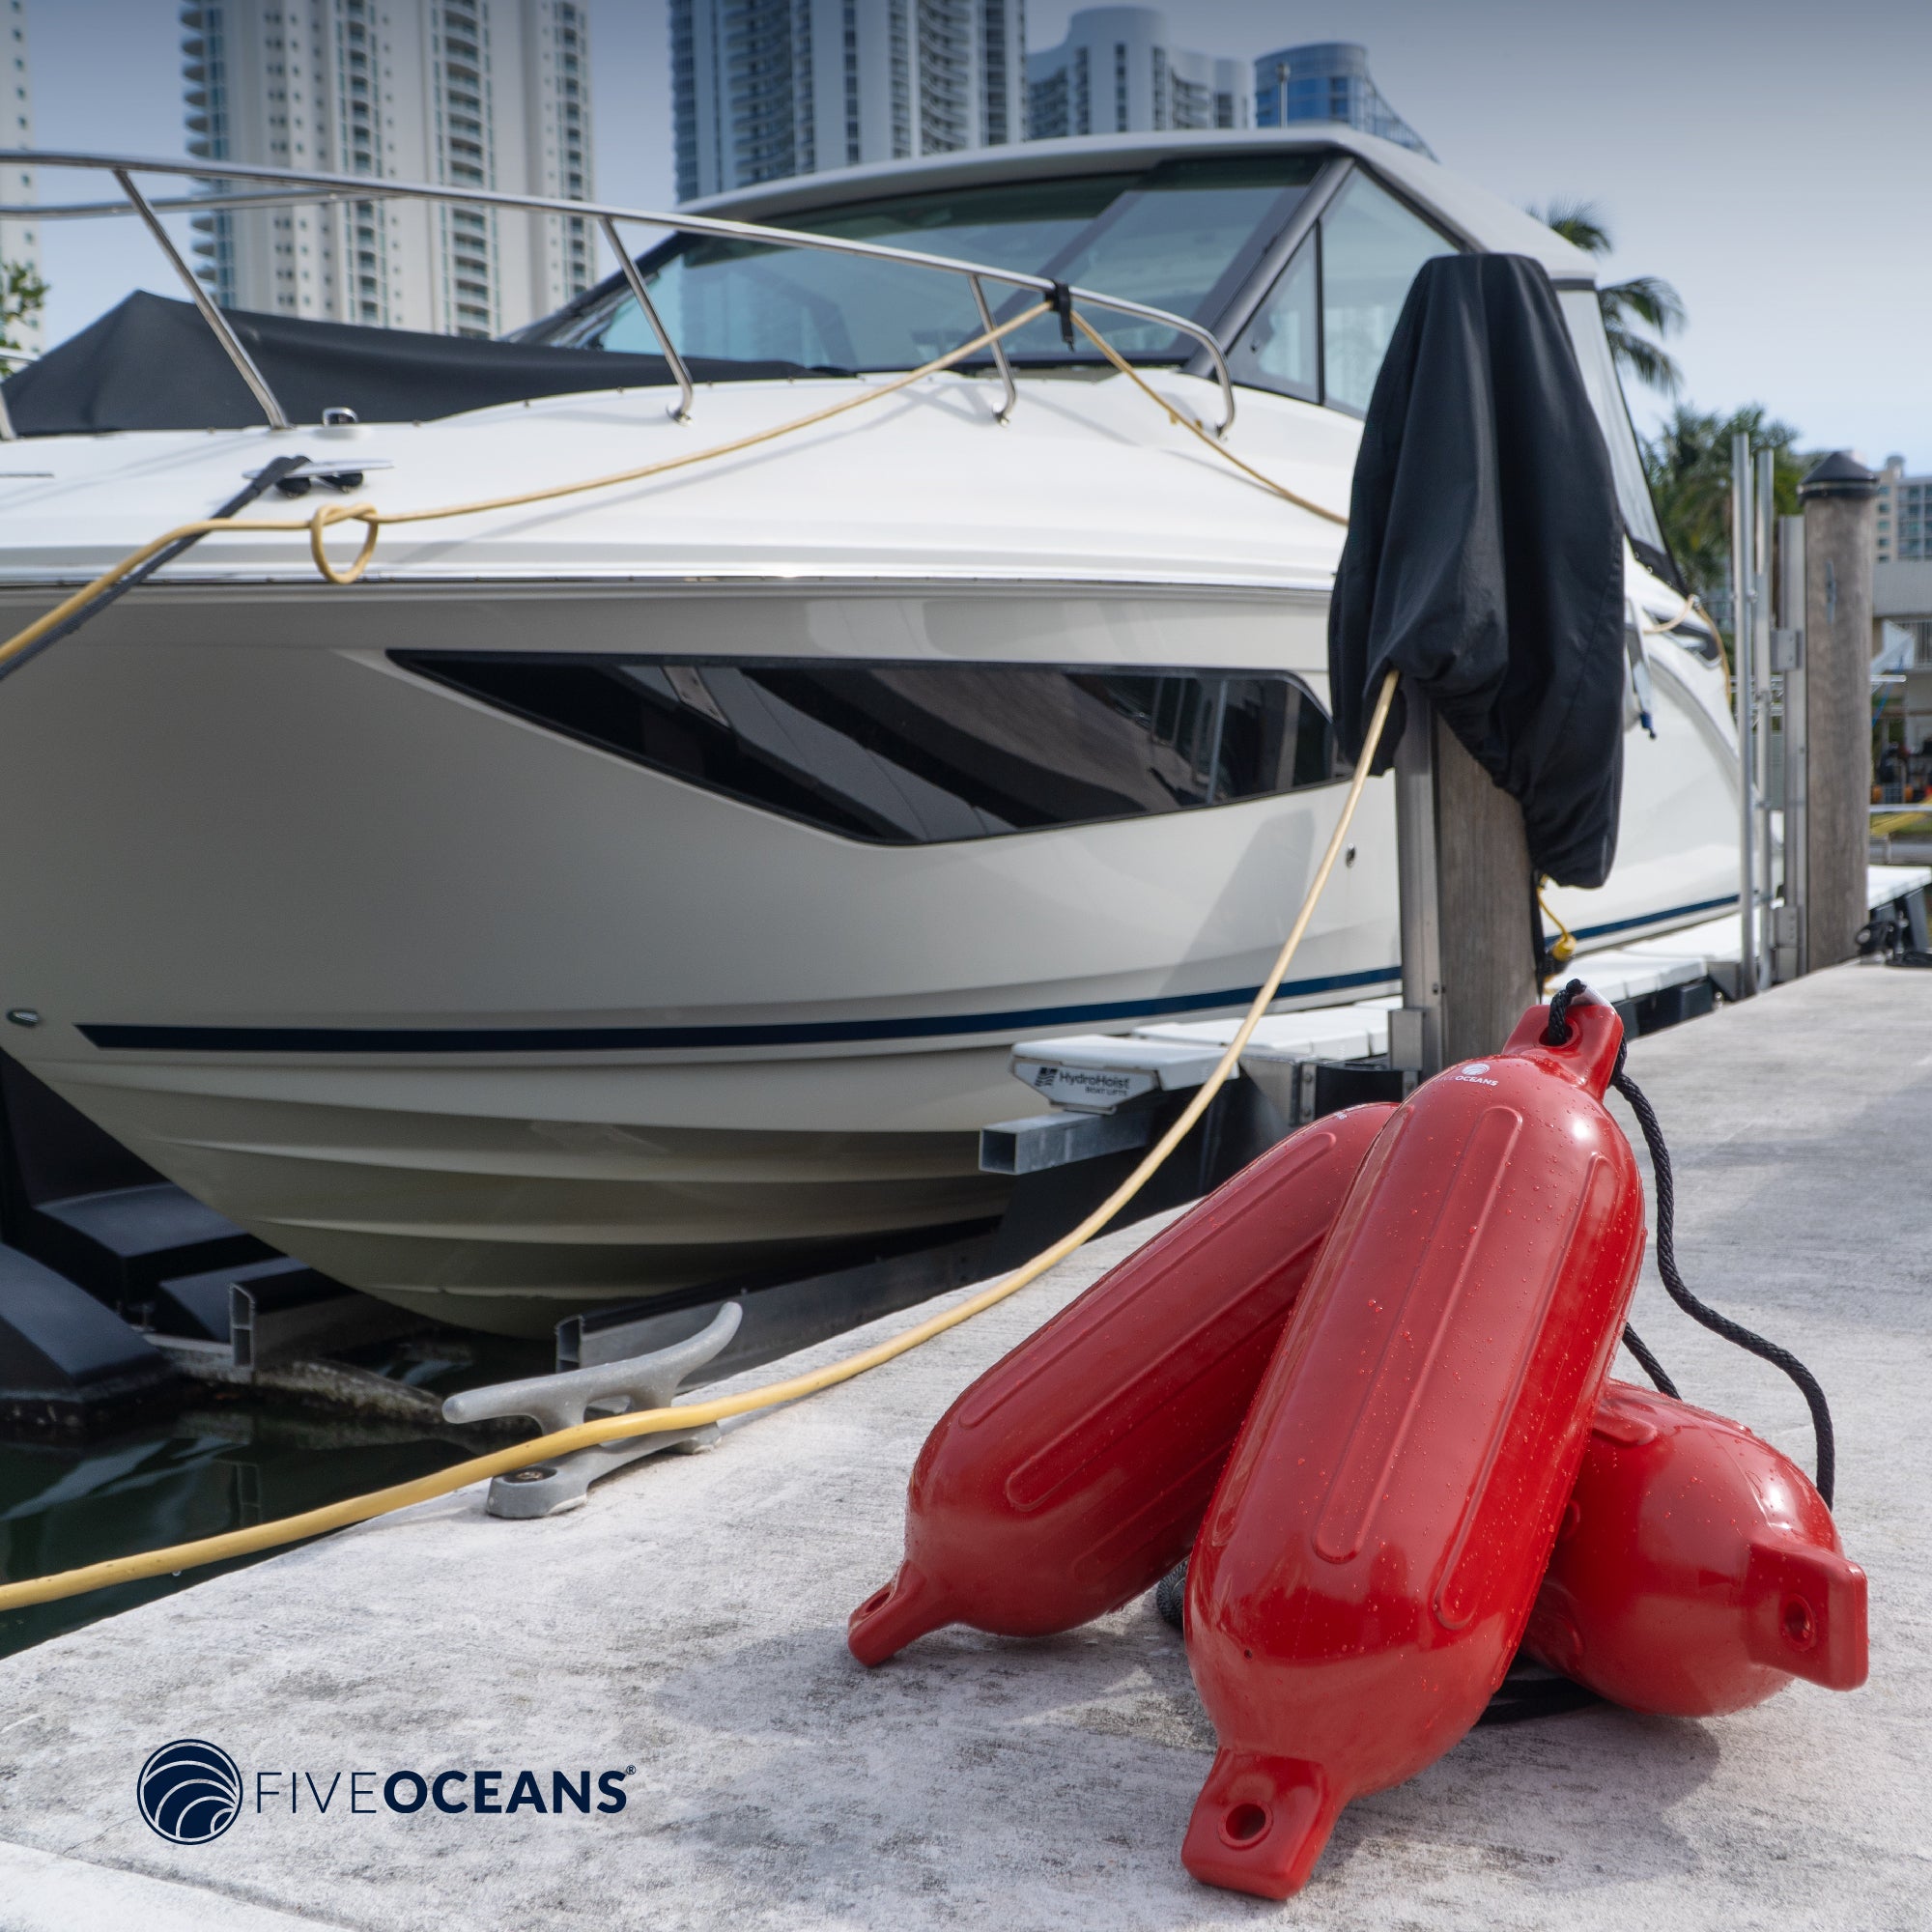 five oceans red boat bumpers for dock